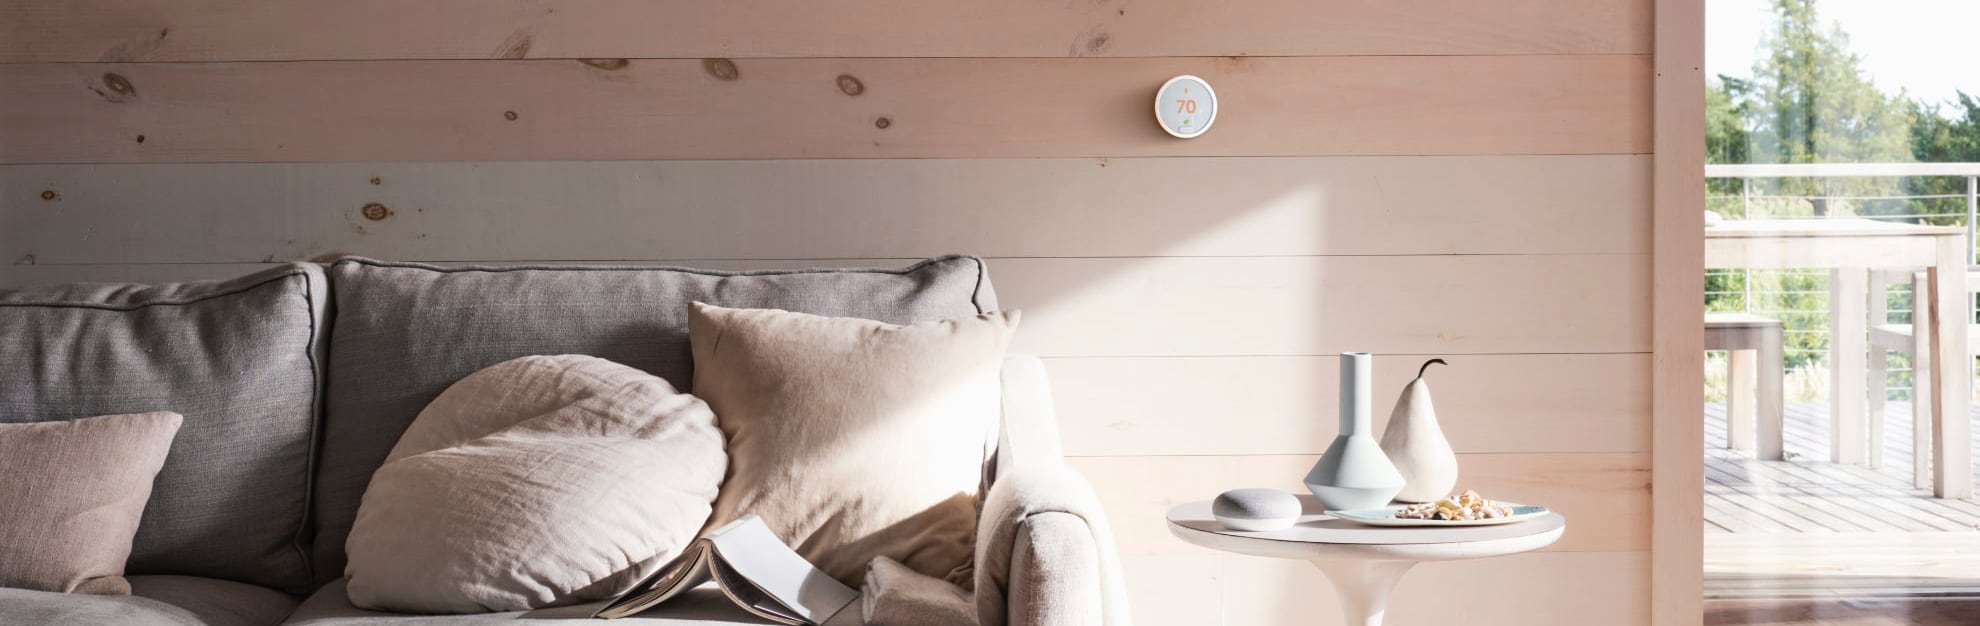 Vivint Home Automation in Augusta